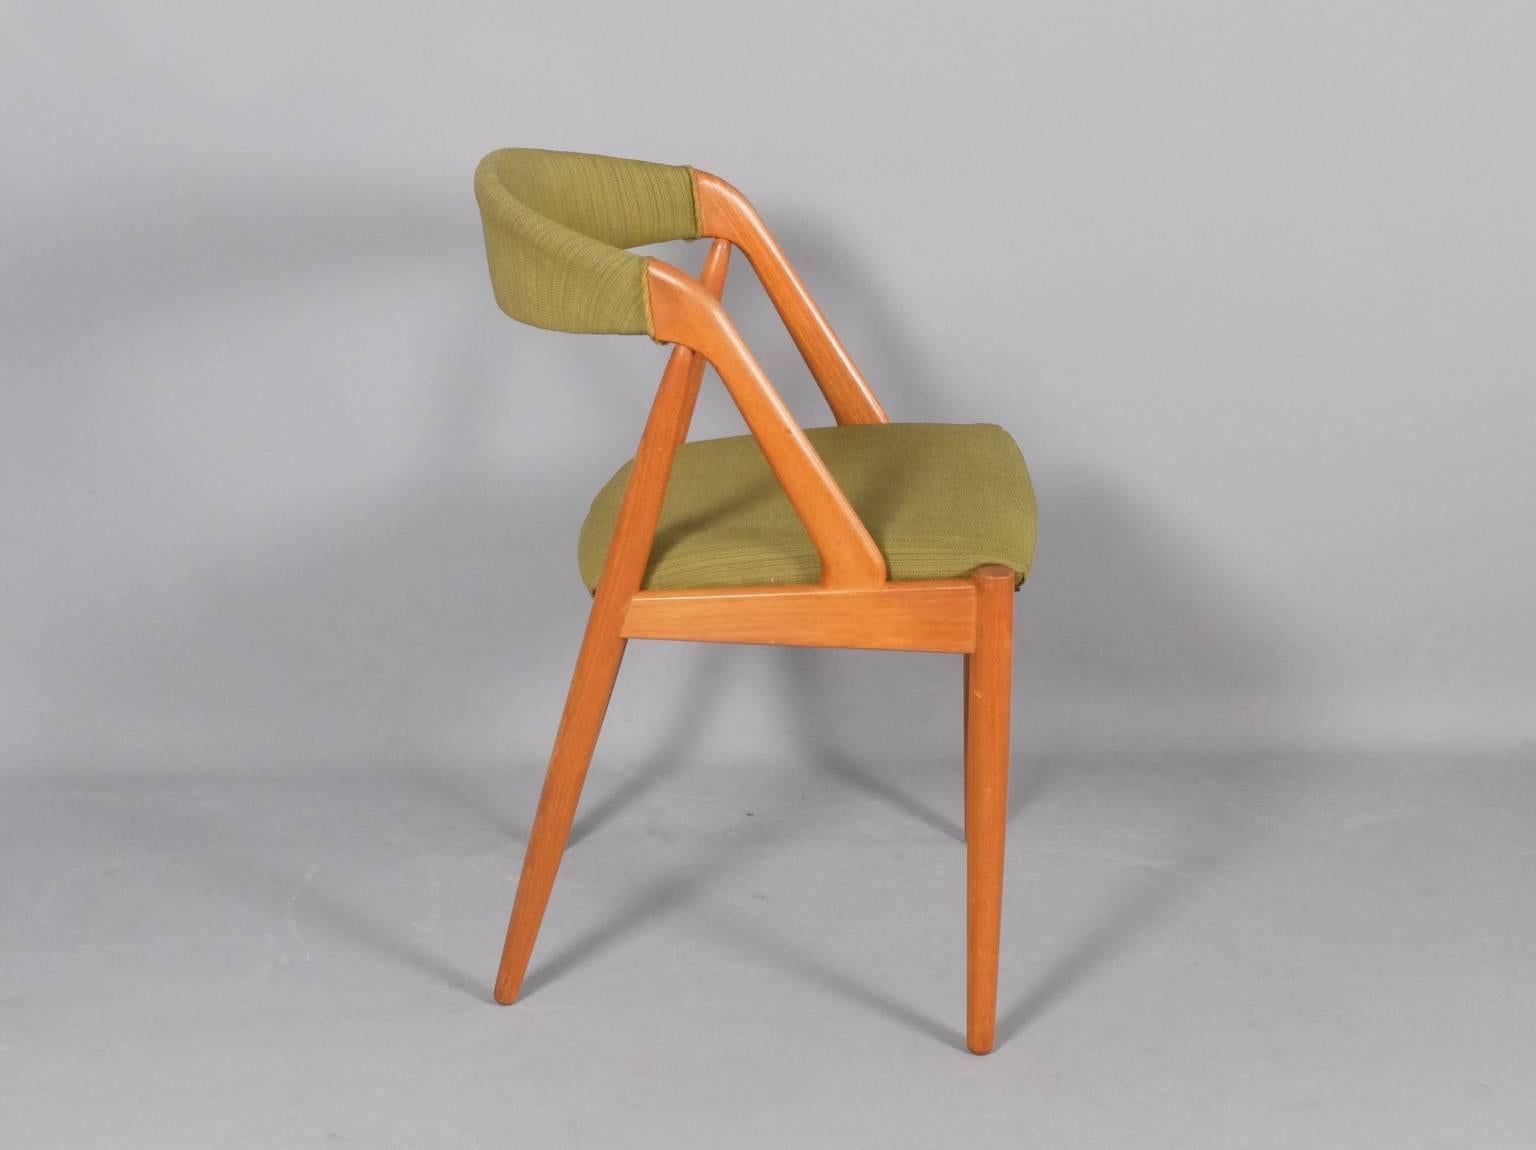 Designed by Kai Kristiansen and produced by Schou Andersen, circa 1960 these chairs are not only beautiful but very comfortable. The light teak frames have been thoroughly cleaned and waxed to bring out the rich grain of the timber. A total of up to